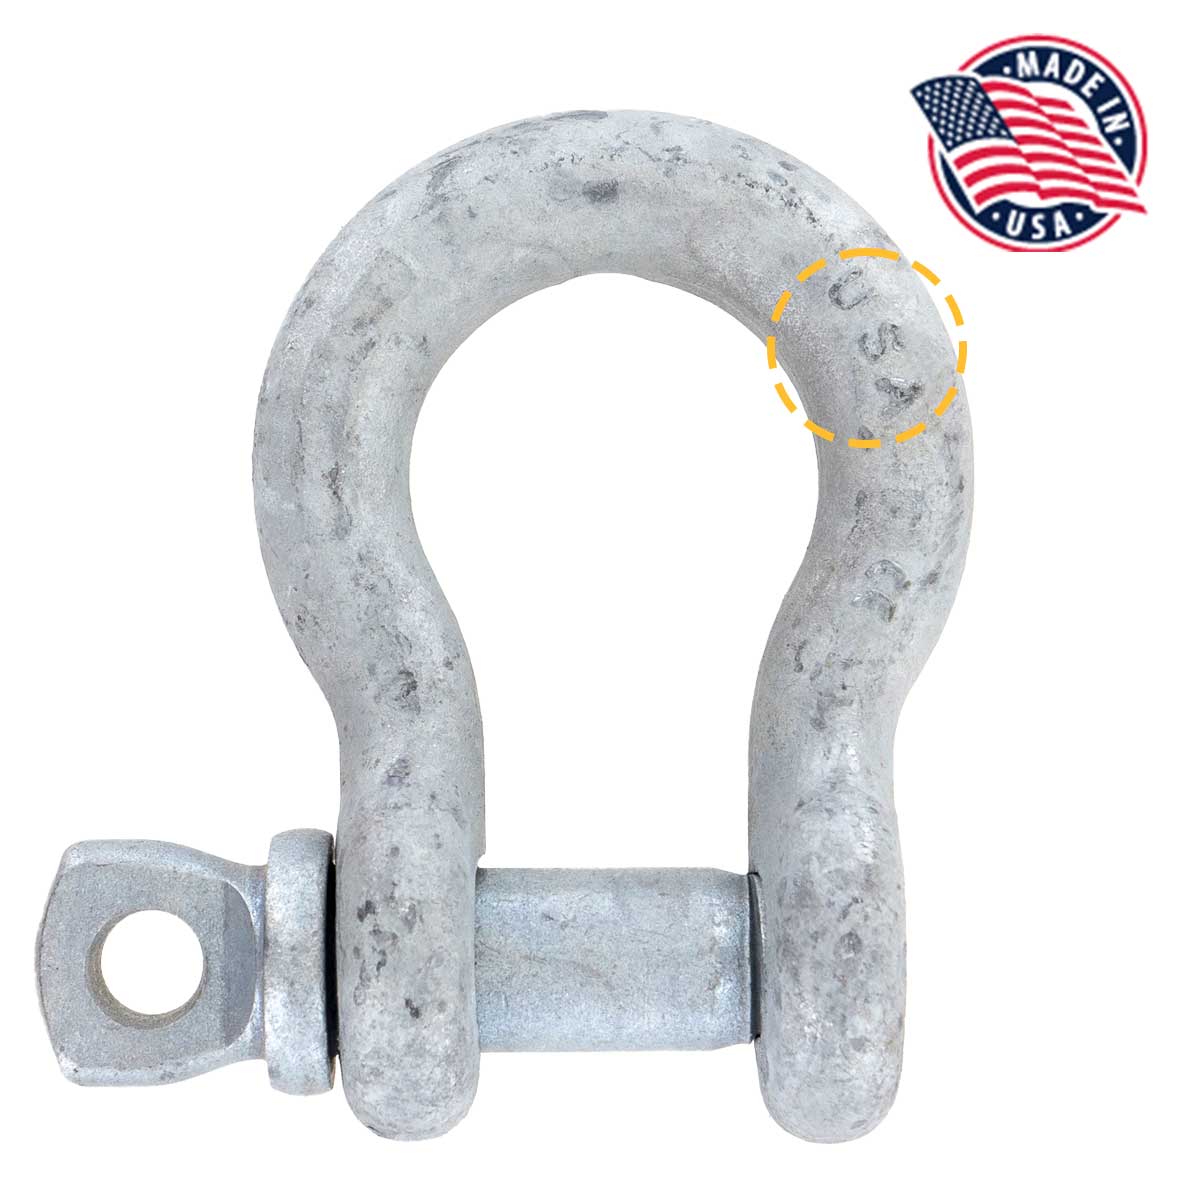 3/8" Crosby® Alloy Screw Pin Anchor Shackle | G-209A - 2 Ton made in USA